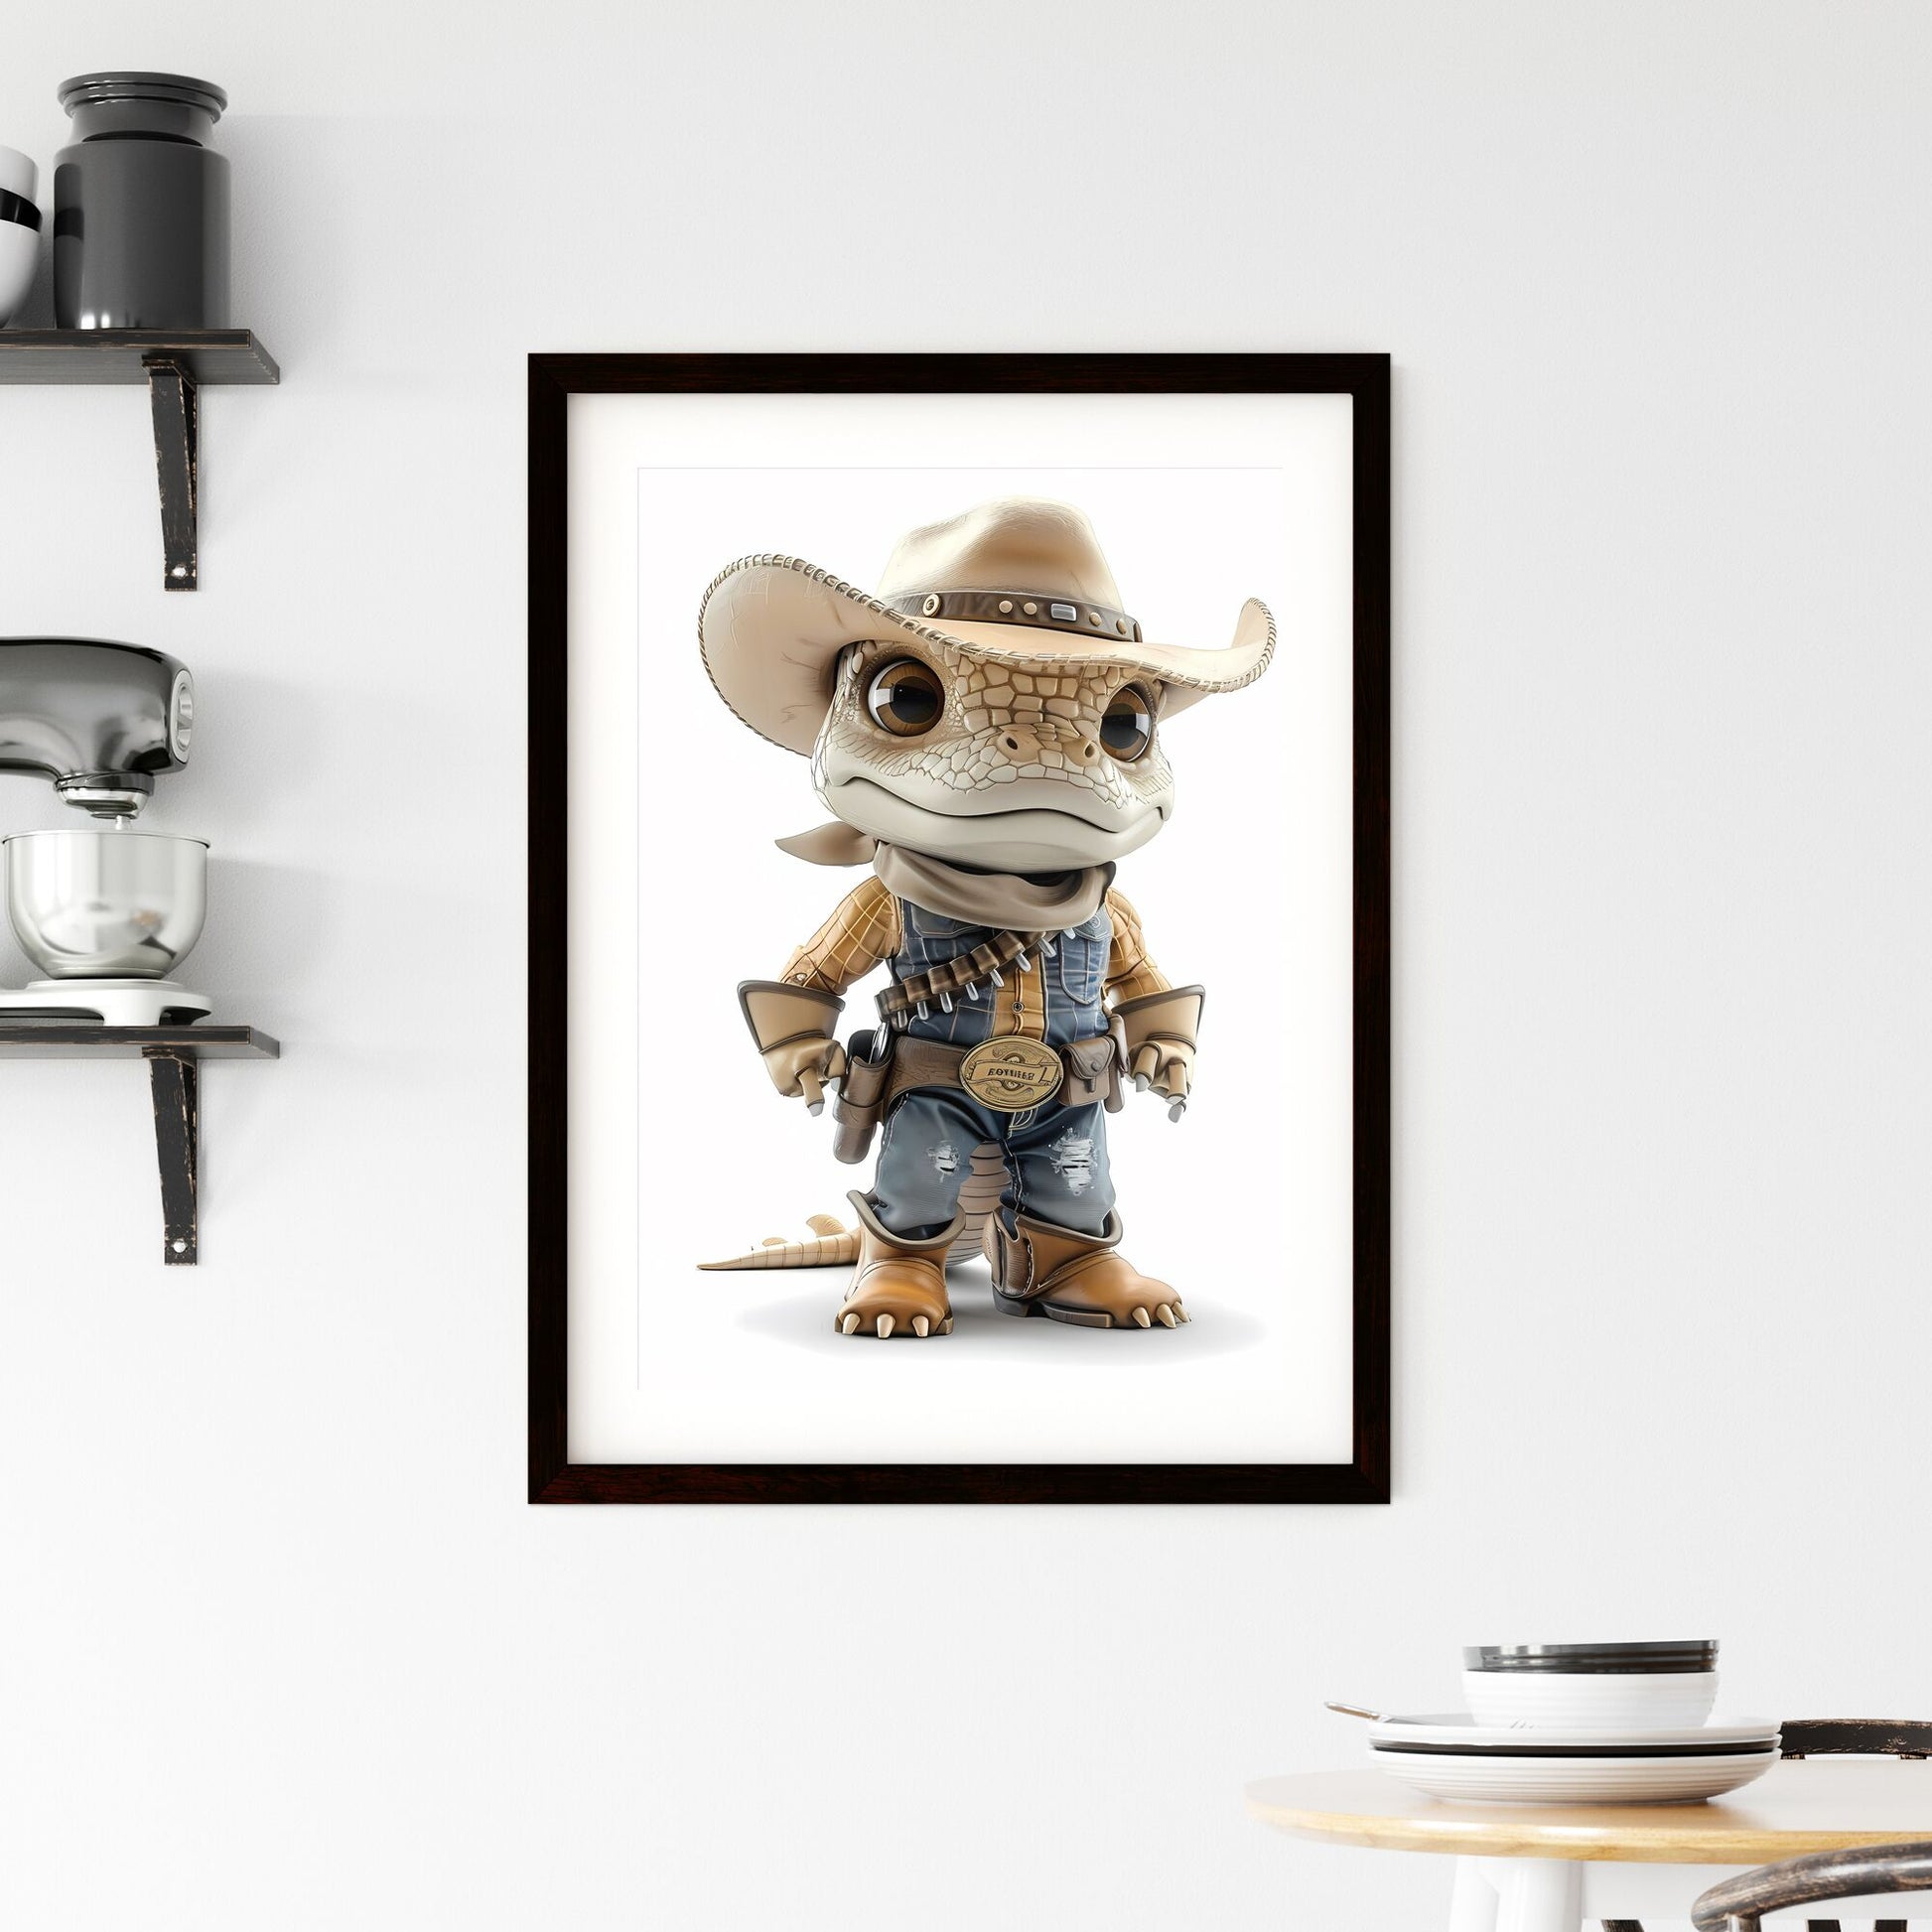 Anthropomorphic Alligator Cowboy Biker Cartoon Character, Isolated White Background, 3D Full-Body, Cowboy Hat and Boots, Vibrant Painting Default Title